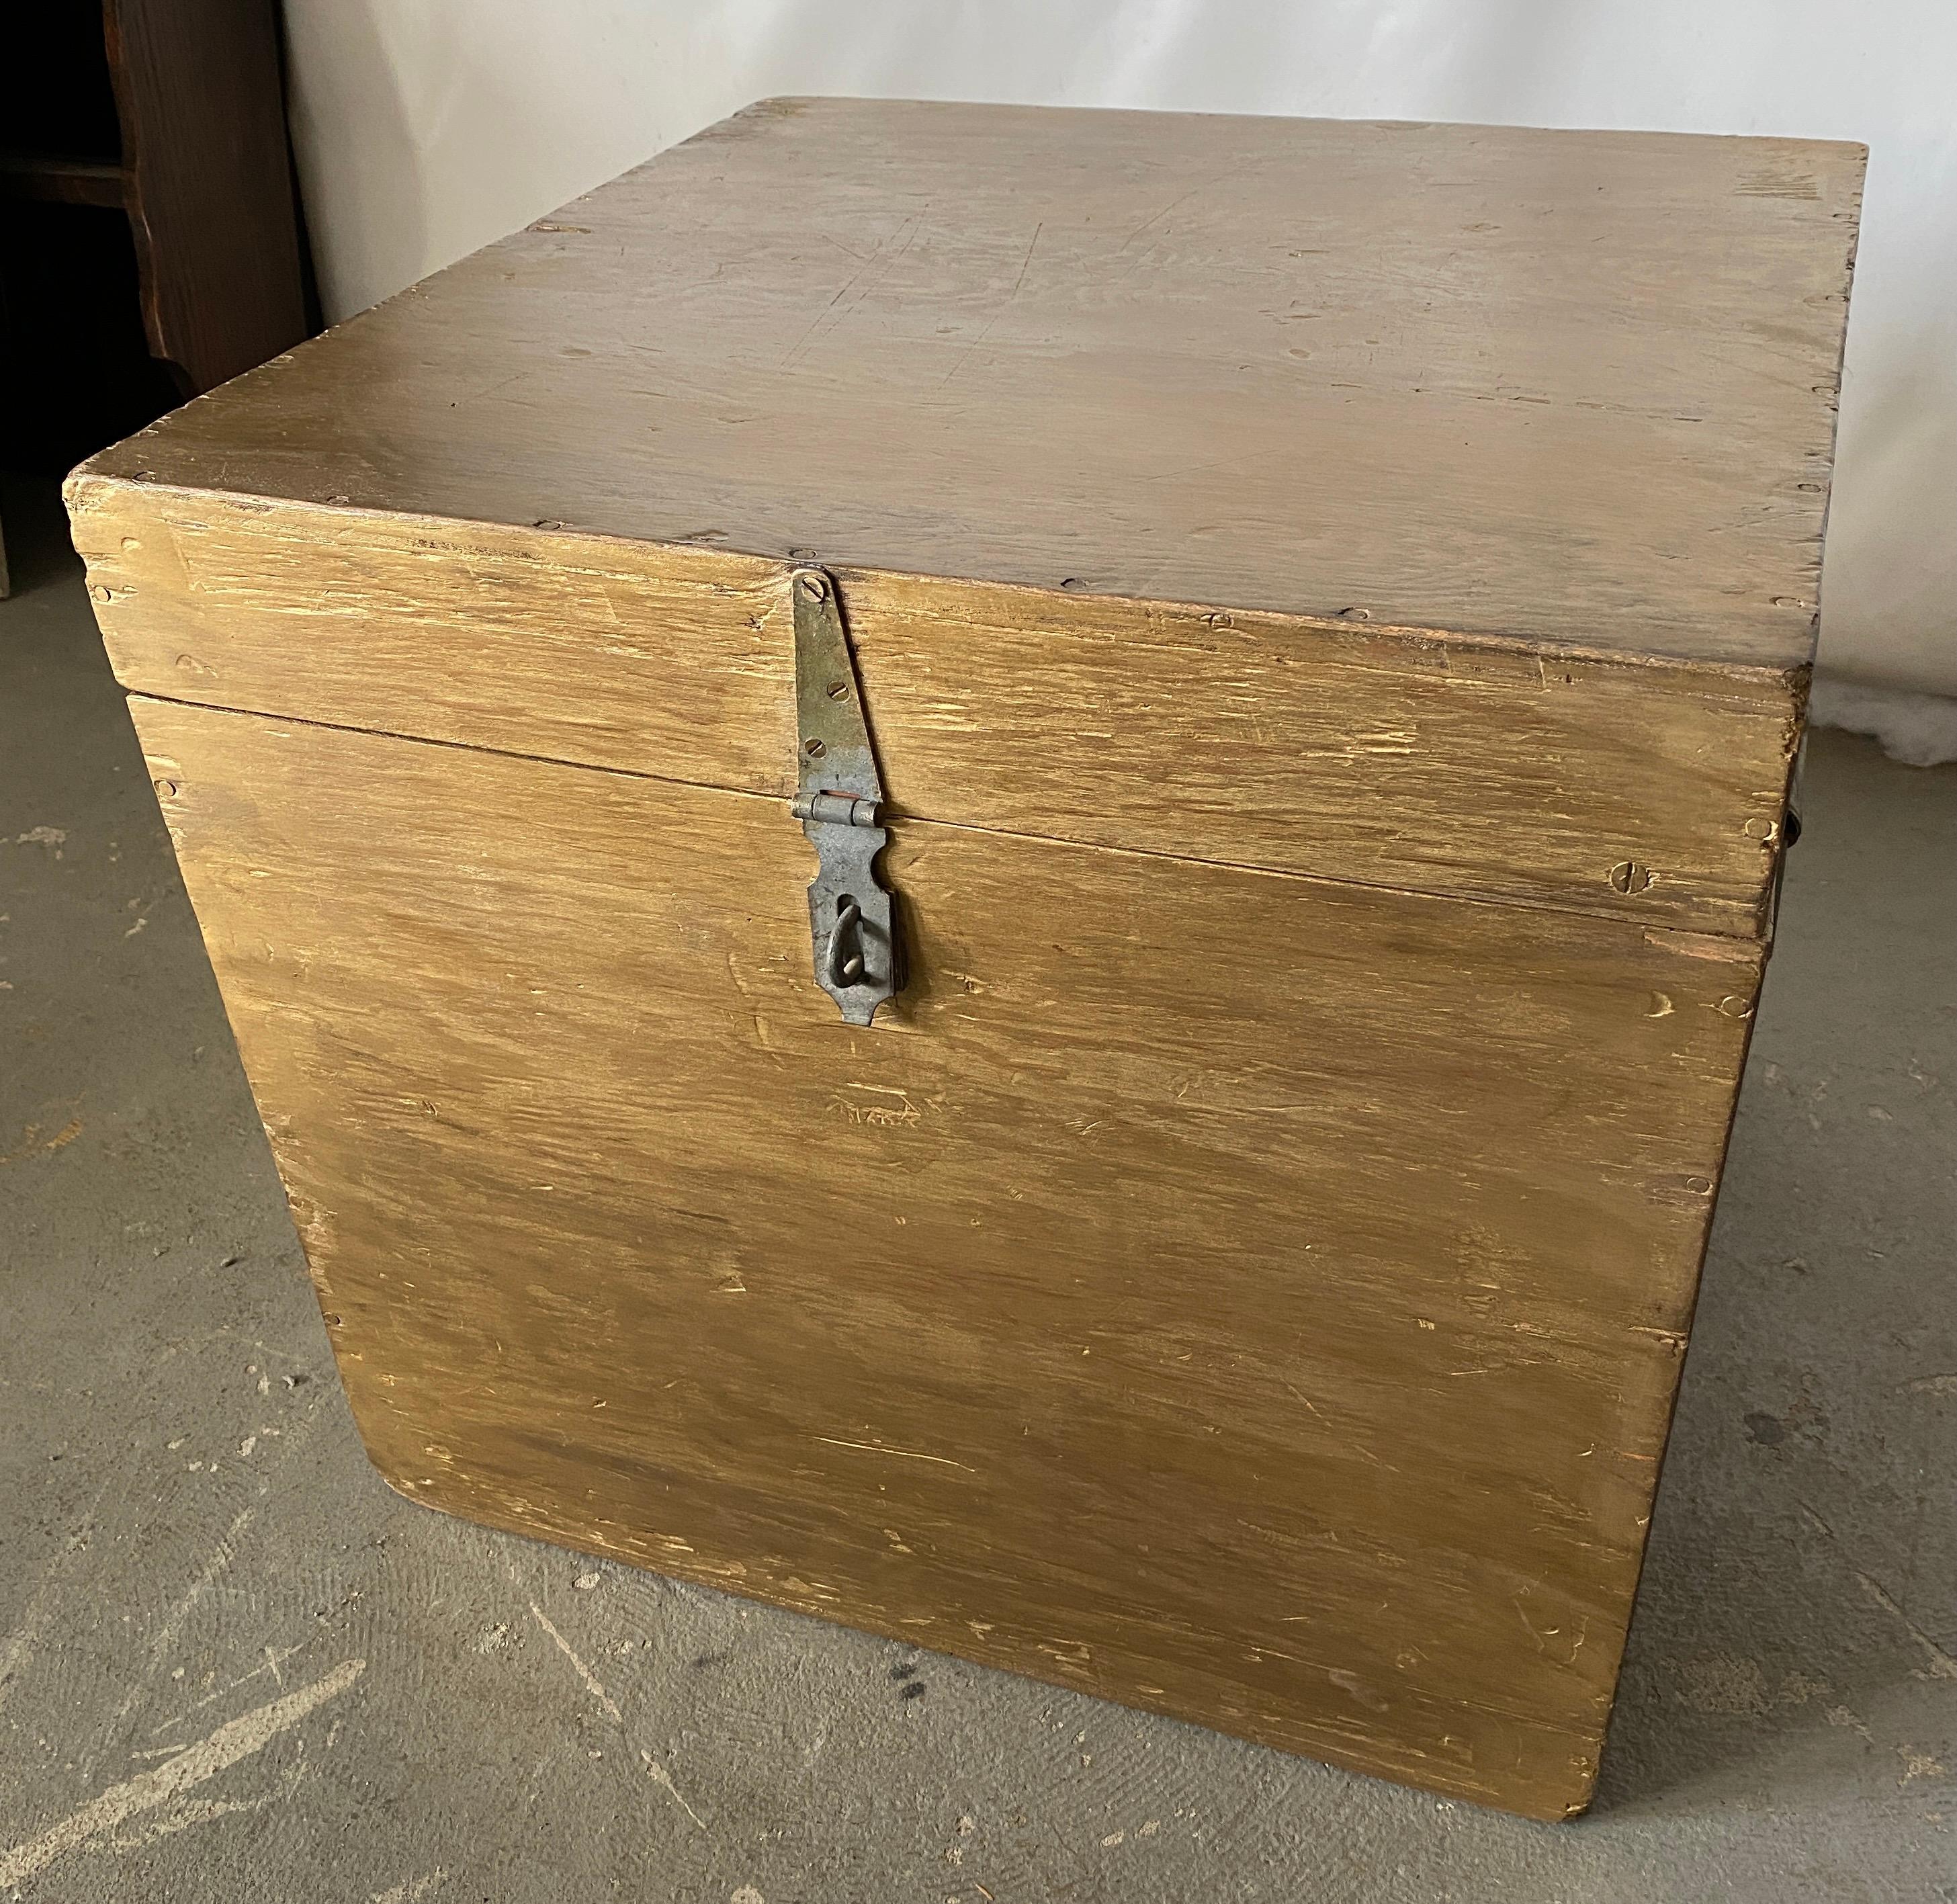 The size of this small antique American square chest lends itself to be used as a side table, end table or coffee table. The sides have handles allowing the piece to be moved easily. The box with clean lines has new gold gilt finish making it a